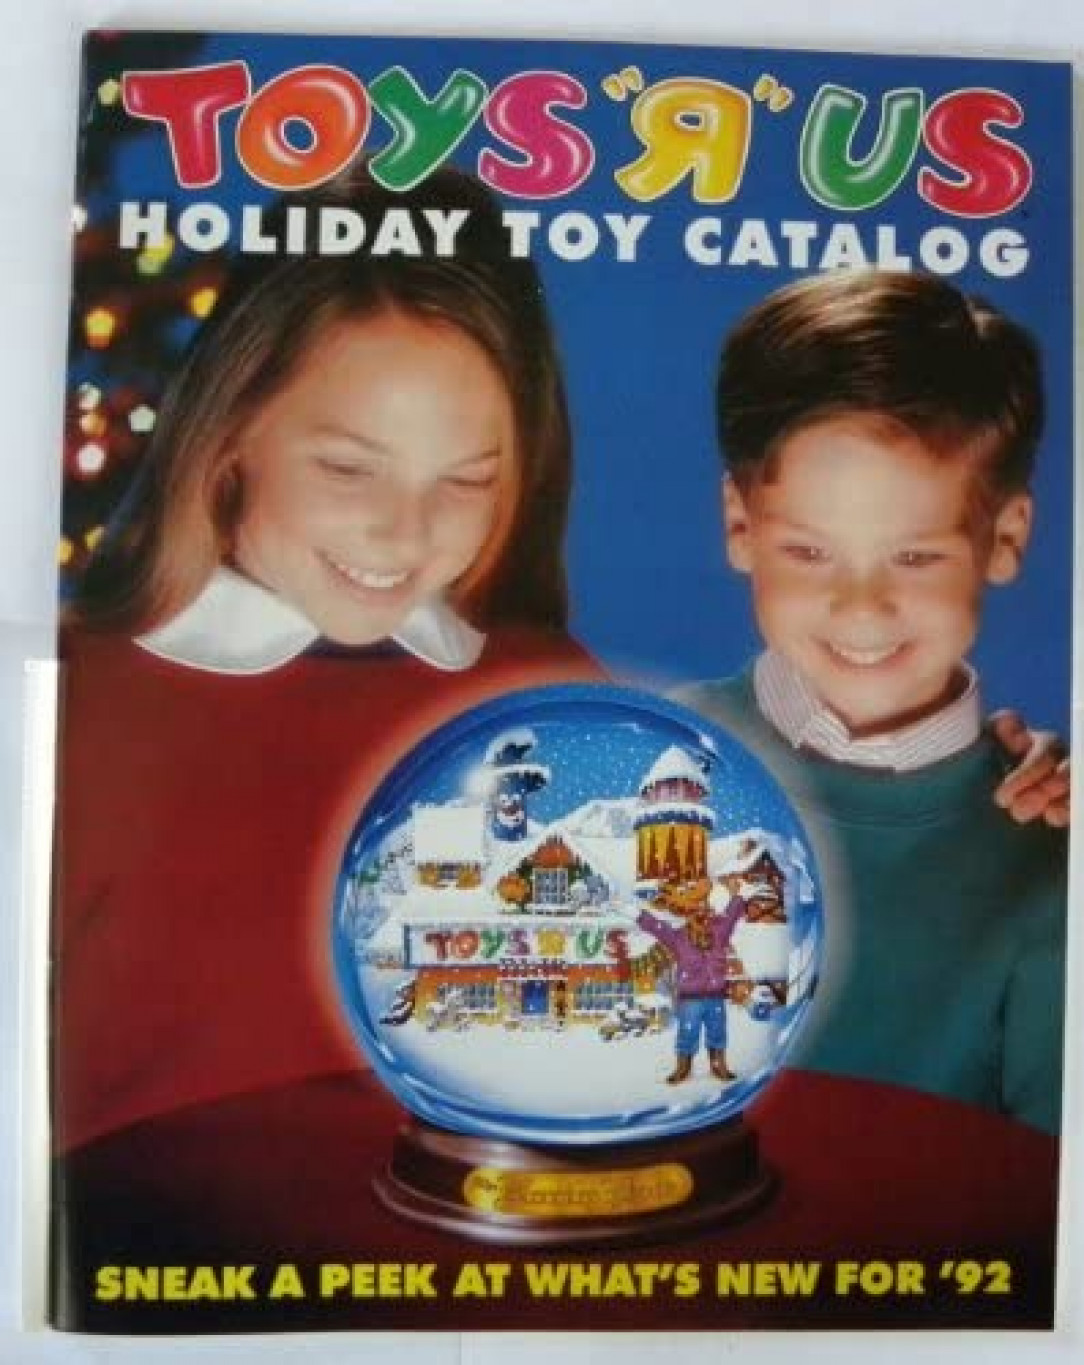 The magic that was the Toys R Us holiday toy catalog. 1992